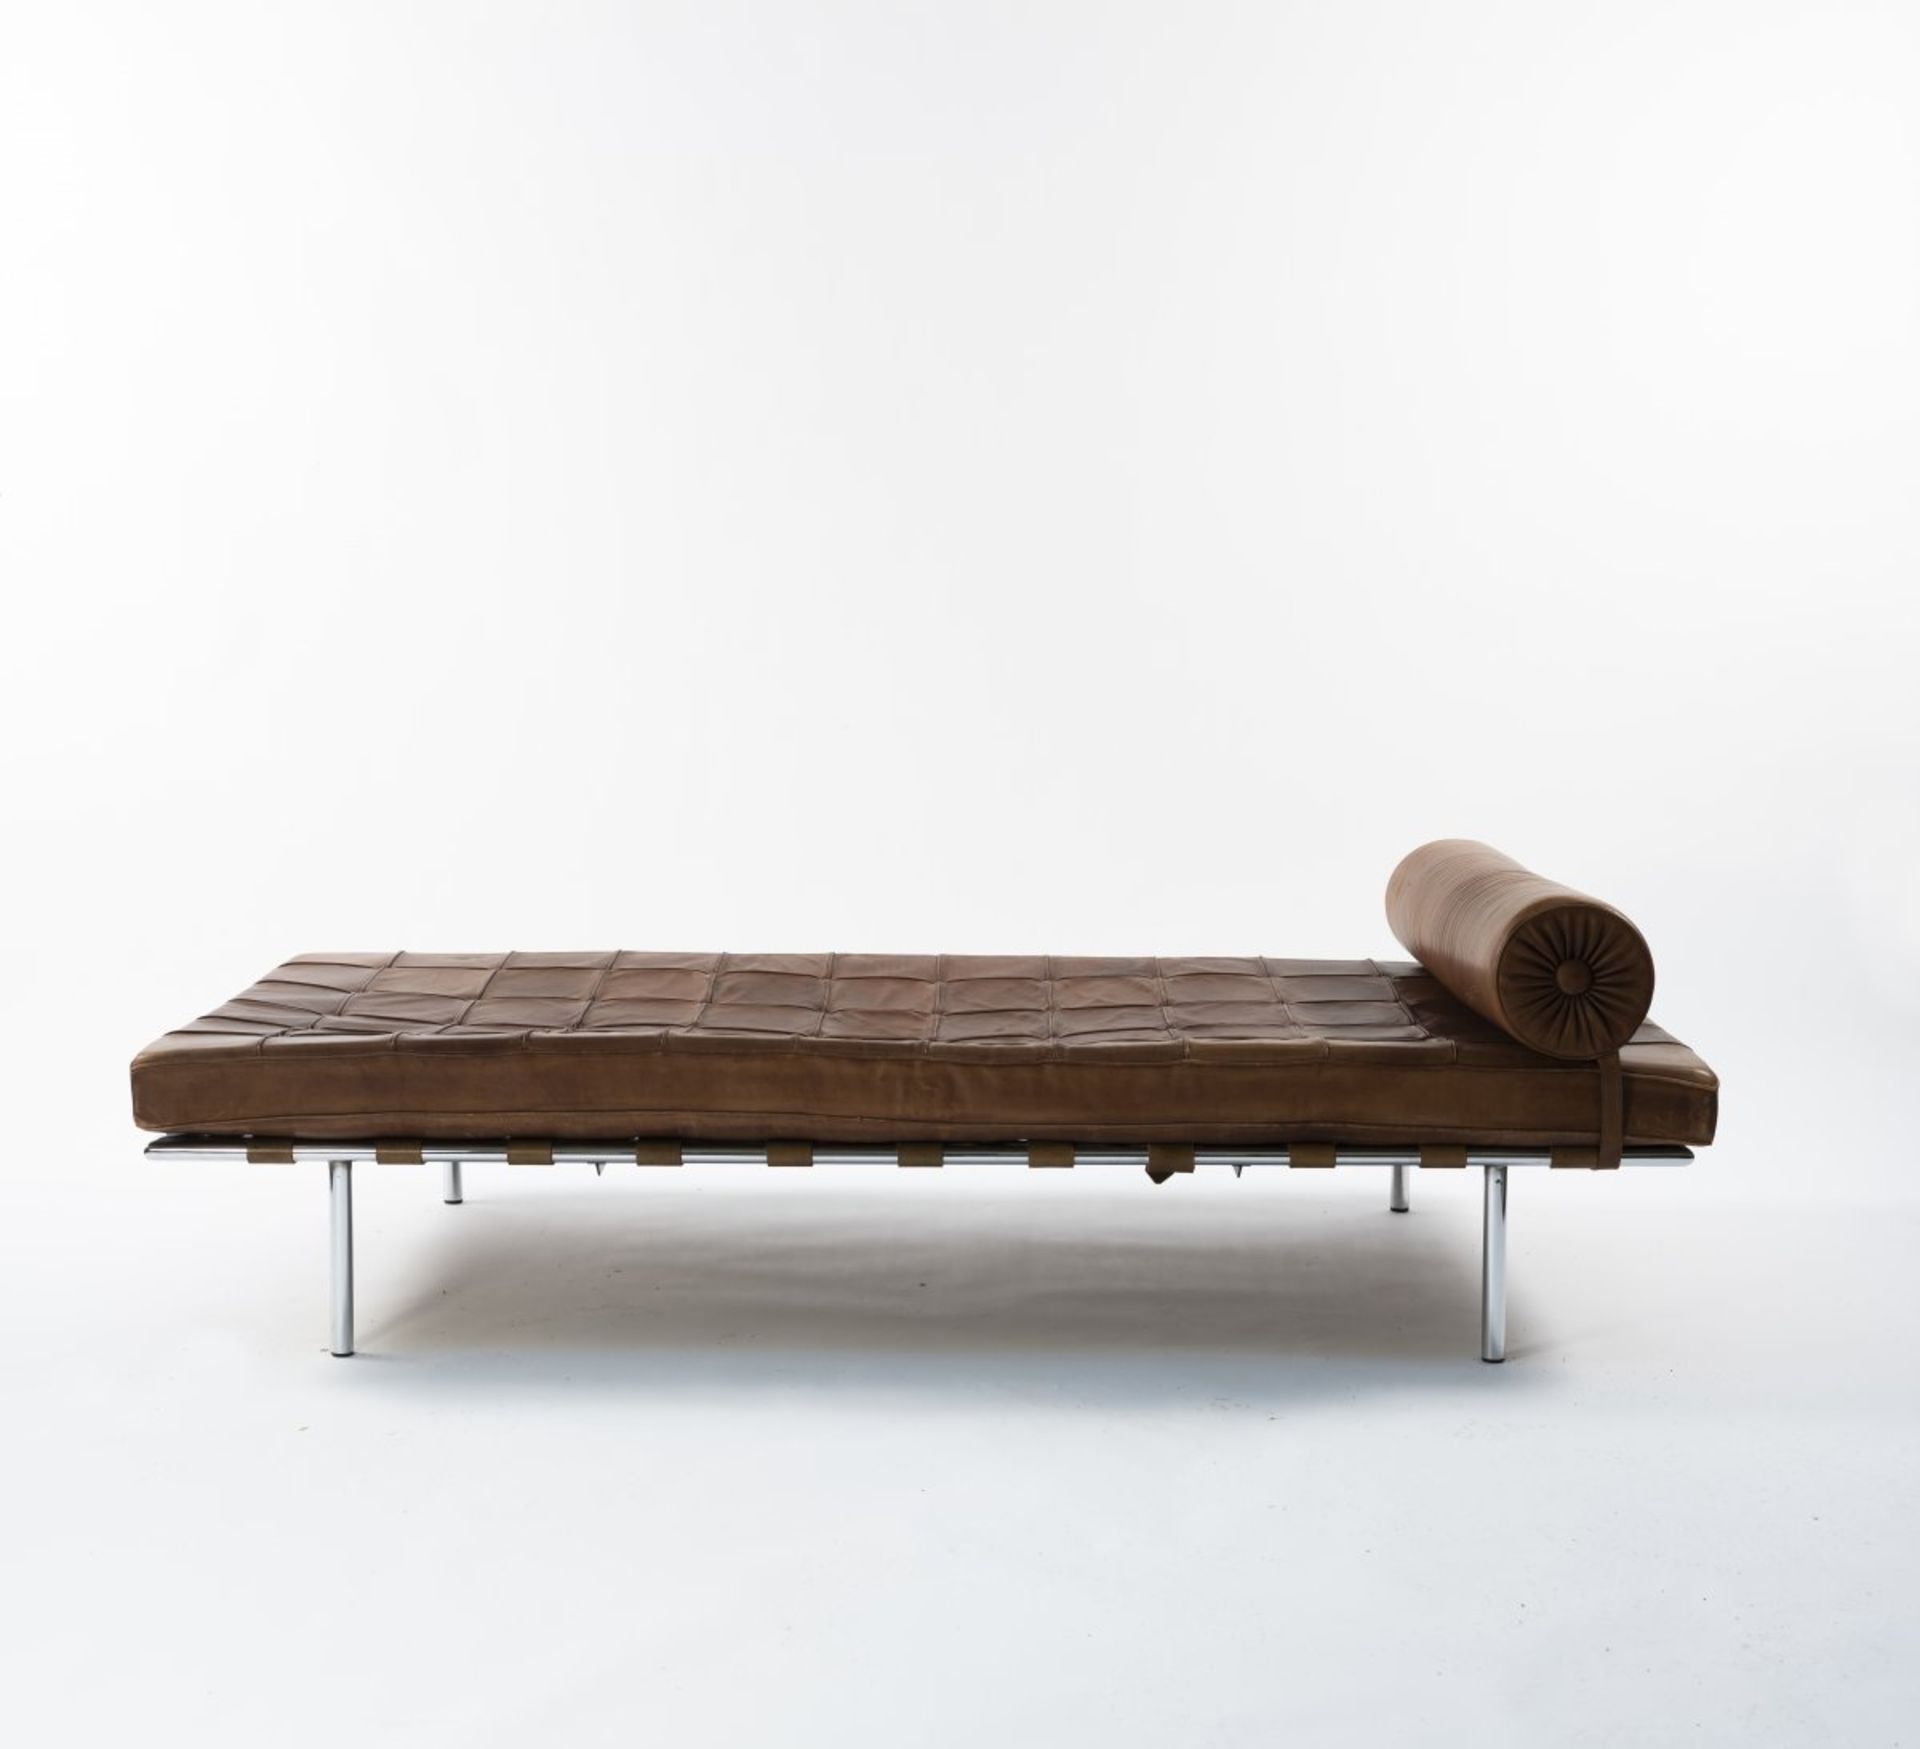 Ludwig Mies van der Rohe; Lilly Reich , 'Barcelona' daybed, 1930